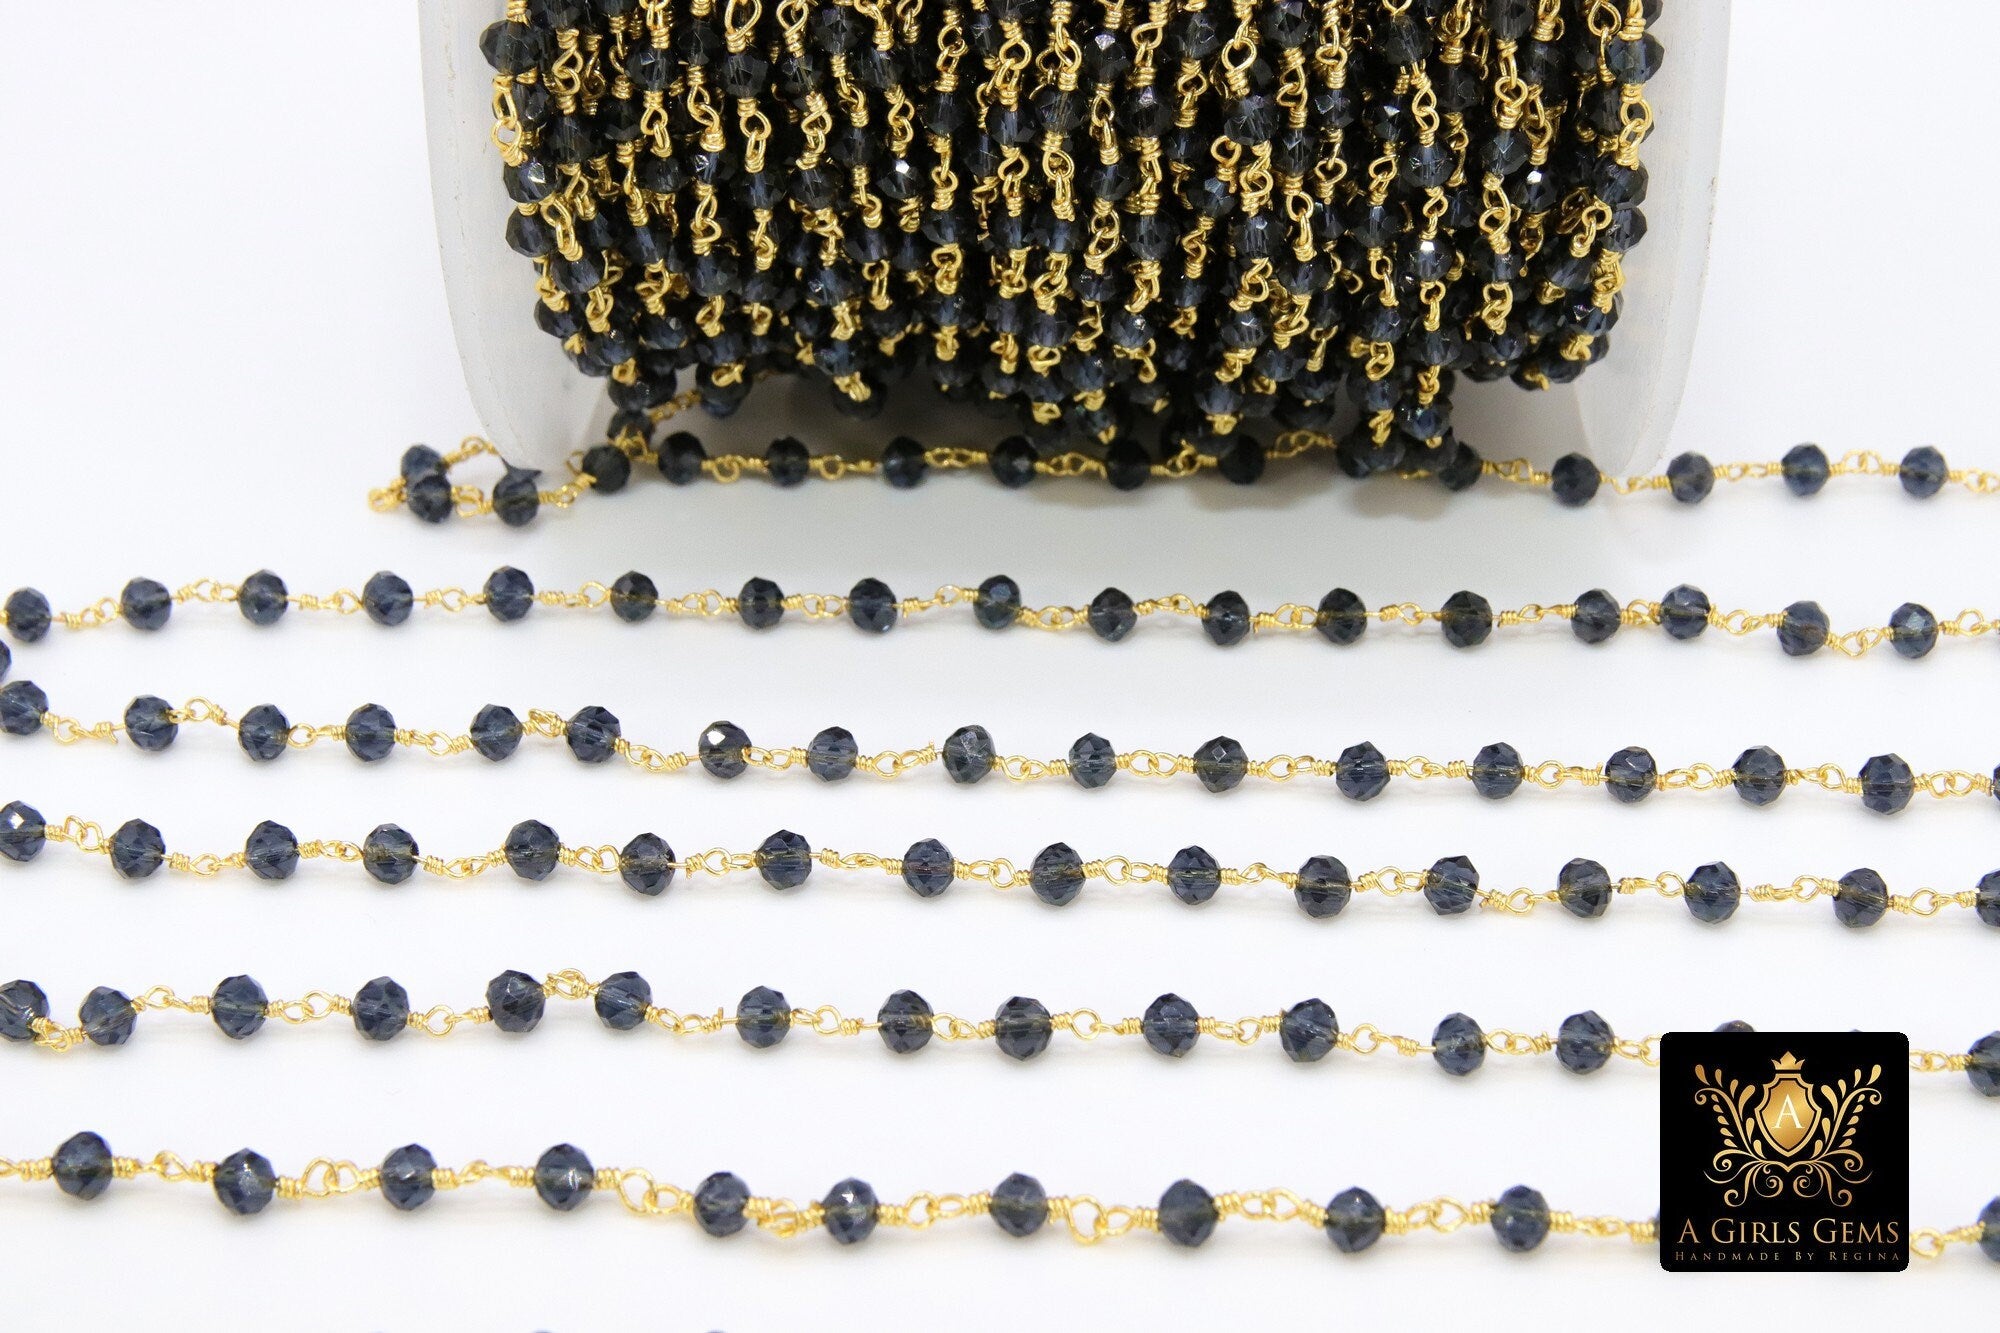 Charcoal Navy Rosary Gold Chain, 4 mm Black Wire Wrapped CH #430, Bead Gunmetal Chains